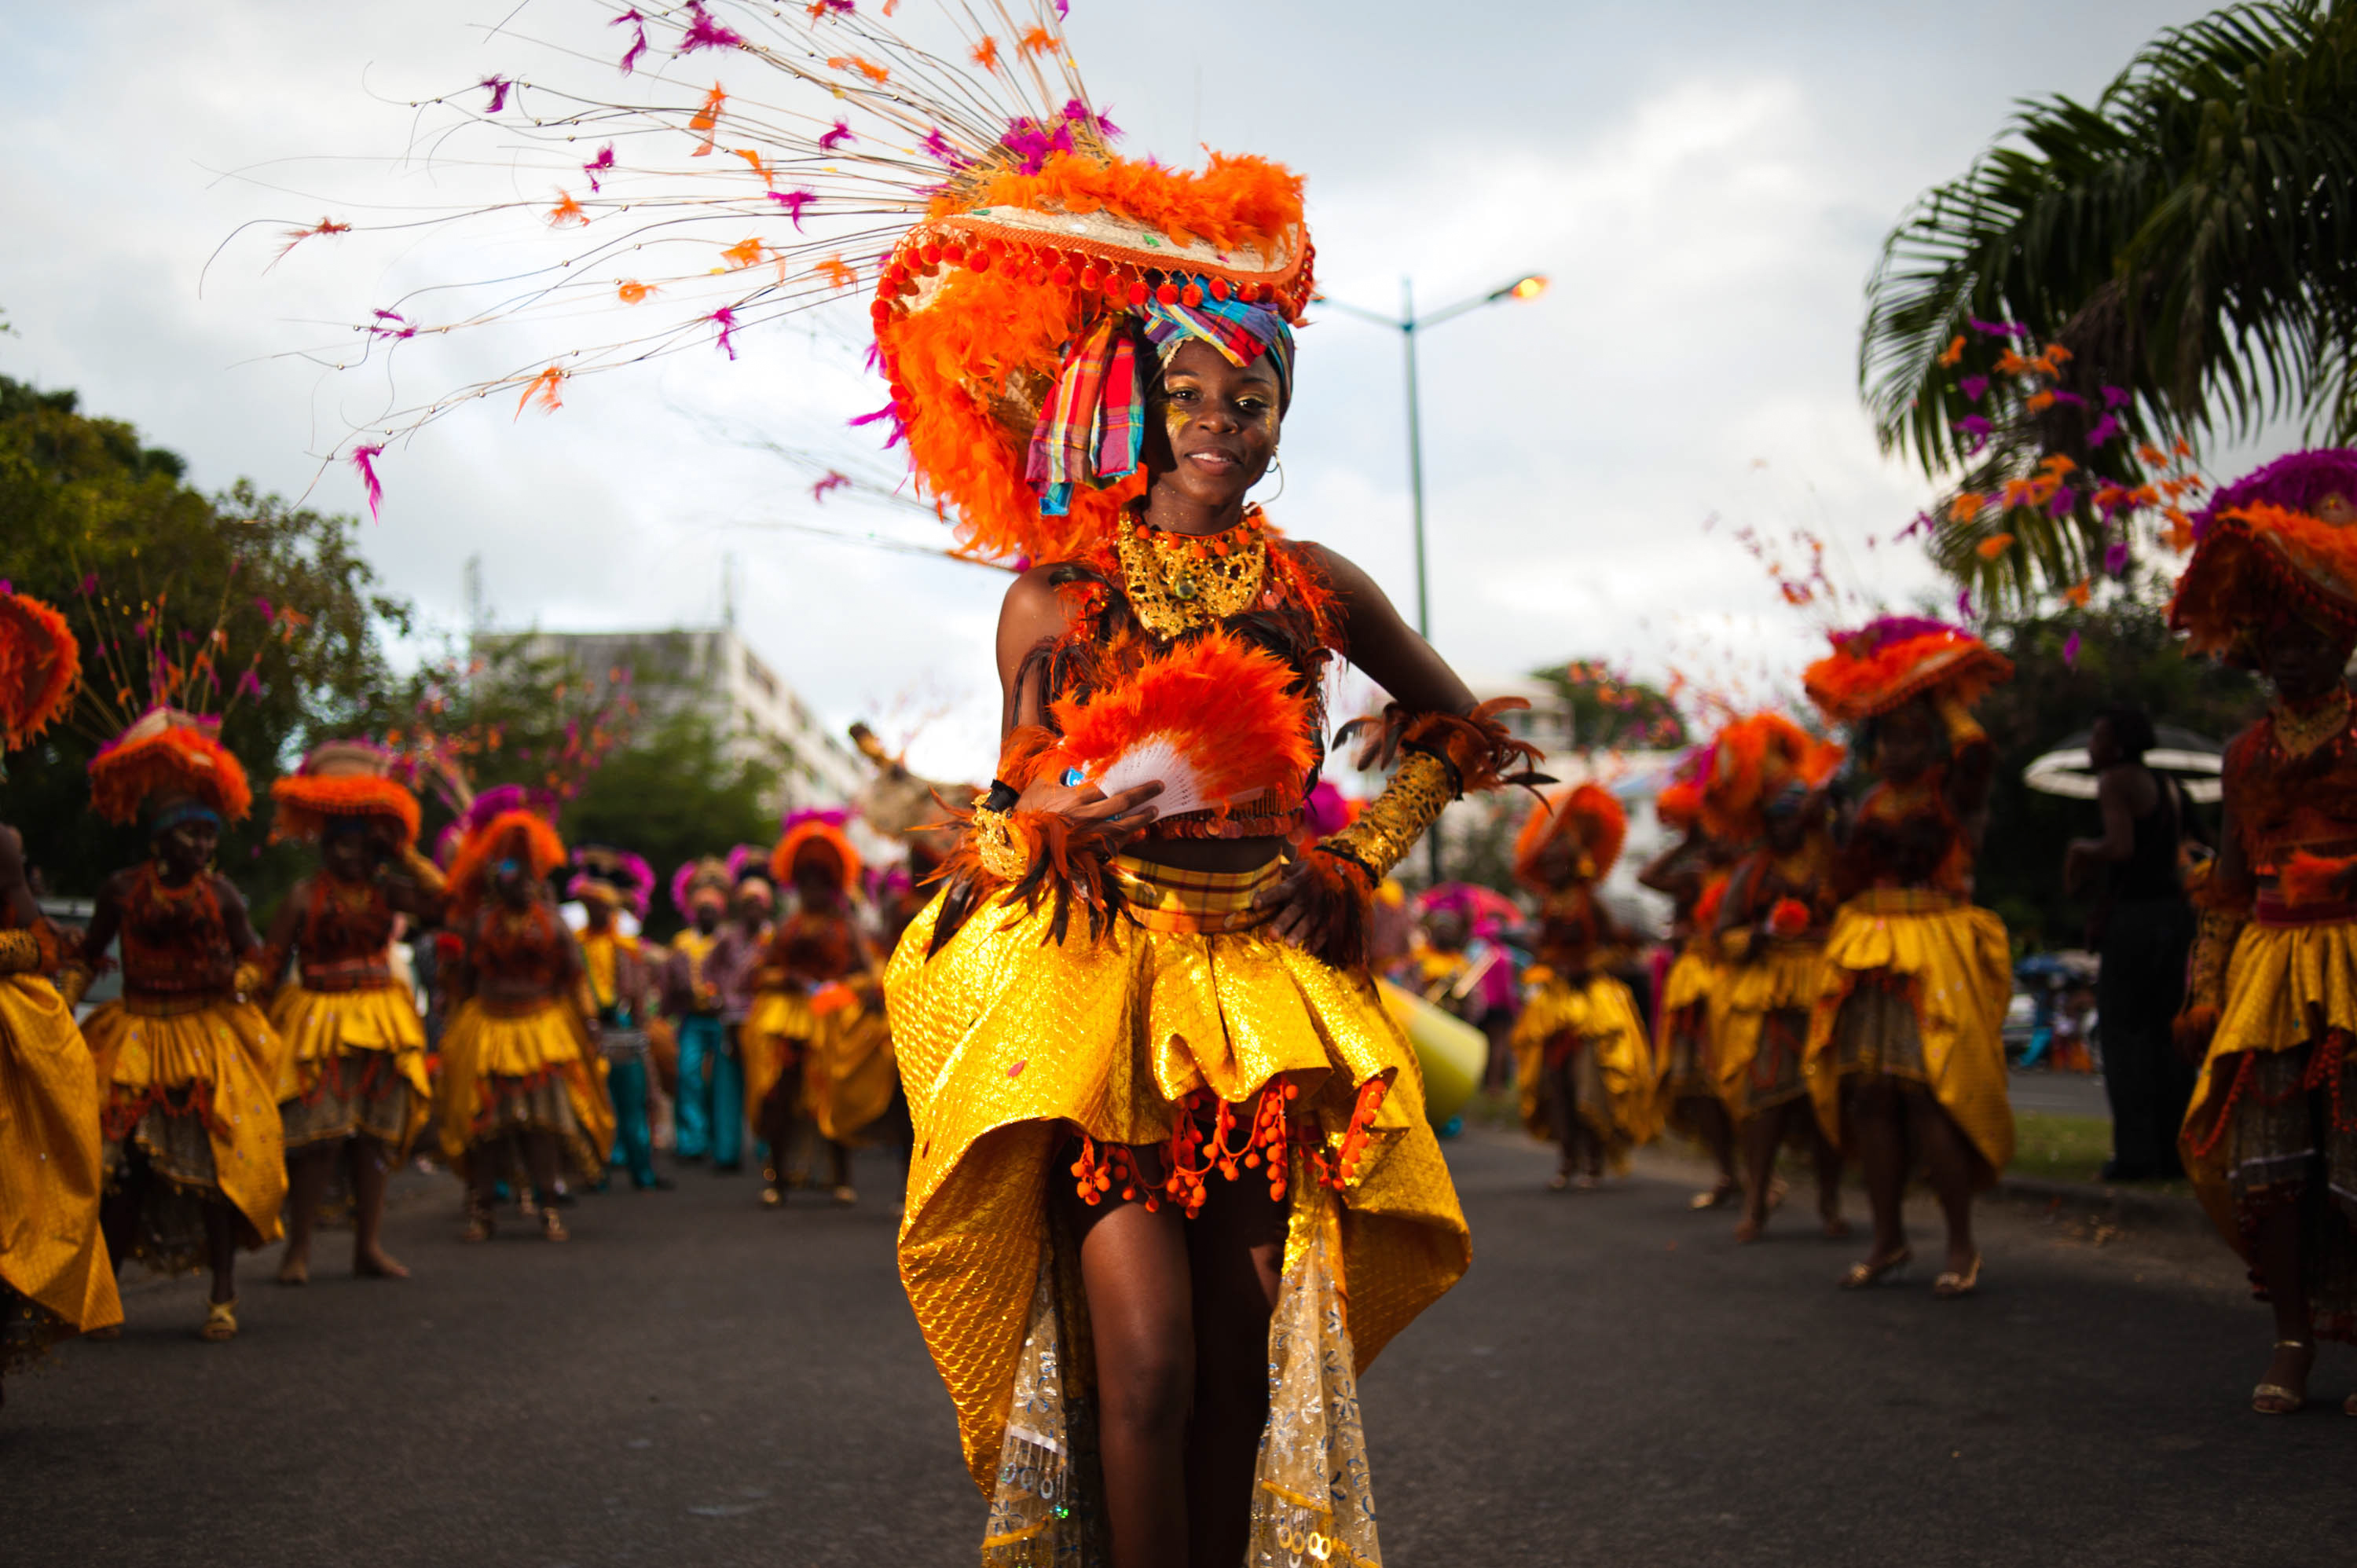 File:Guadeloupe winter carnival, Pointe-à-Pitre parade. A young woman,  performer wearing traditional carnival outfit (waist up outdoor  portrait)-3.jpg - Wikimedia Commons